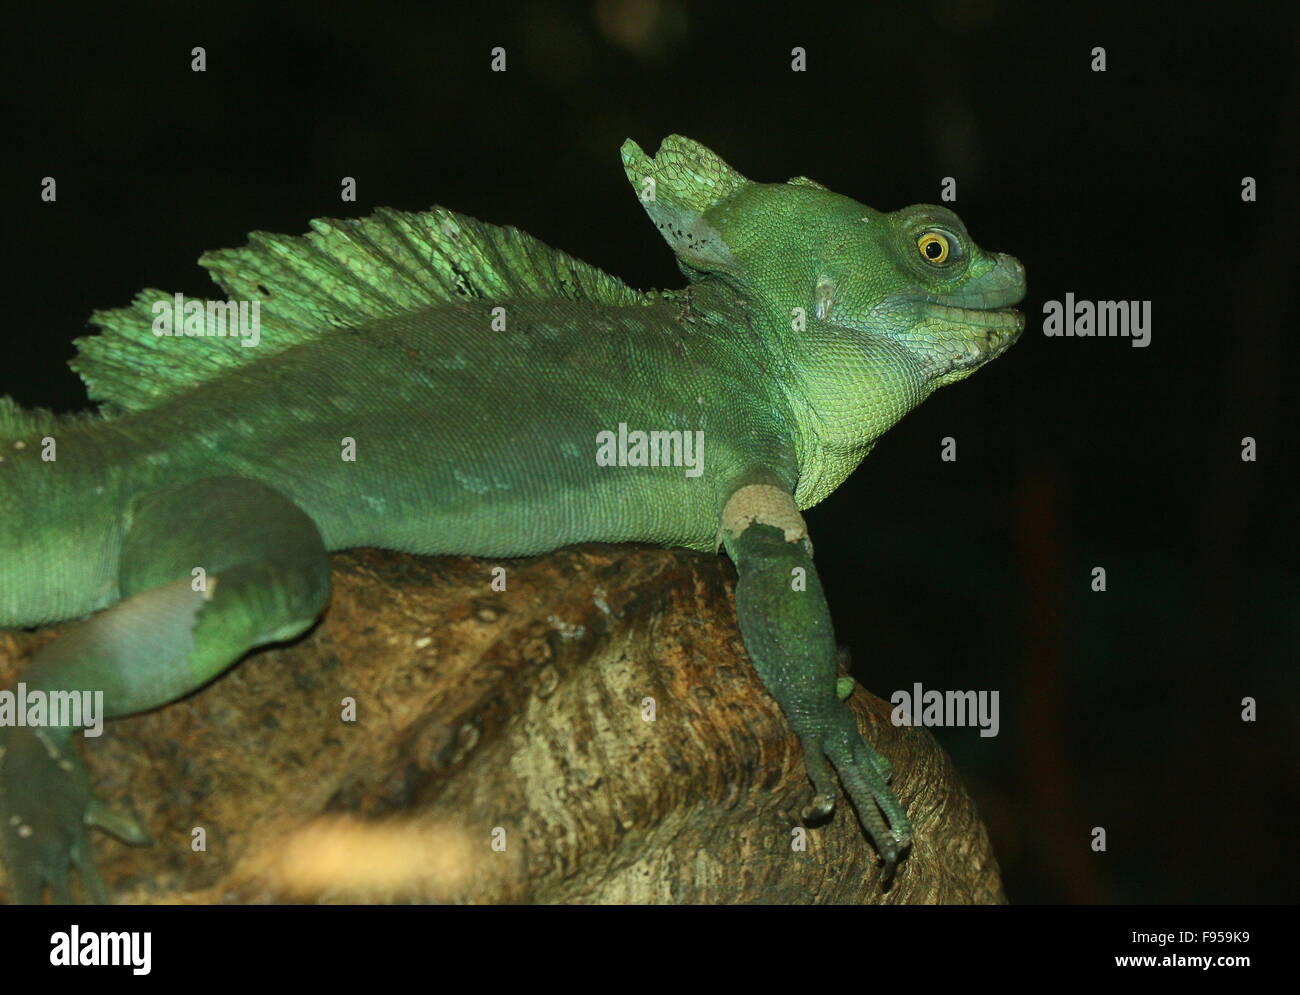 Male Central American Green or Plumed basilisk (Basiliscus plumifrons), a.k.a. double crested basilisk or  Jesus Christ Lizard Stock Photo